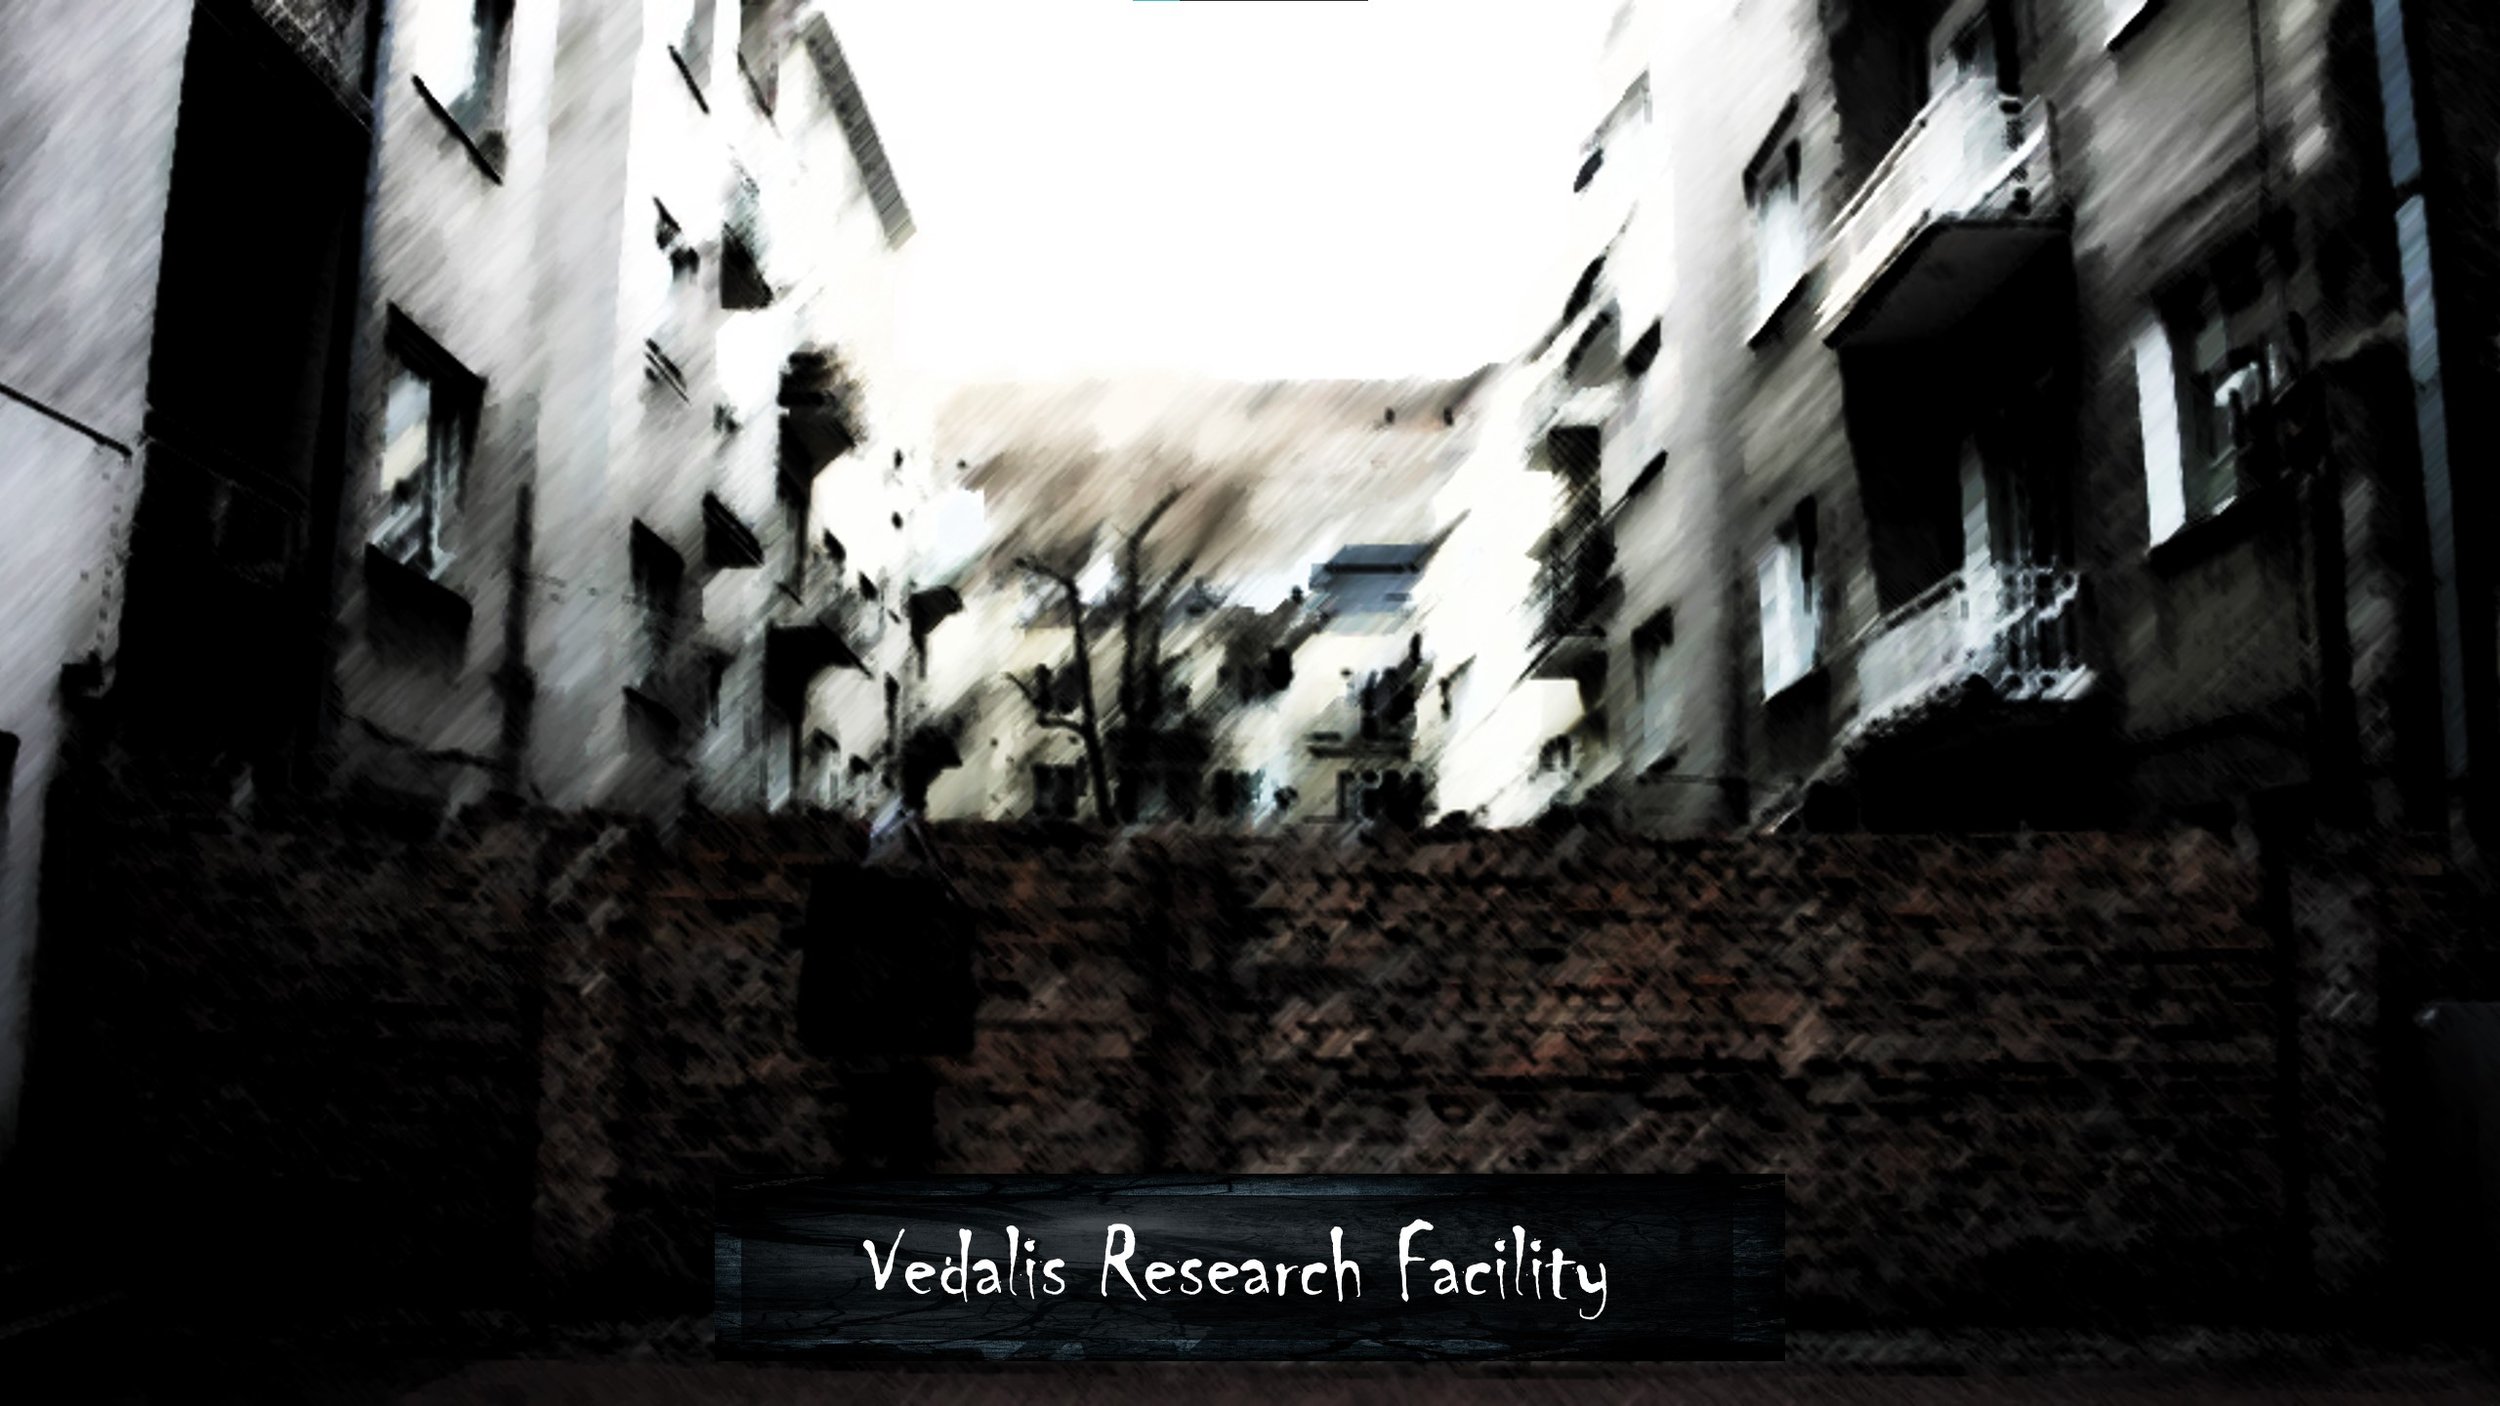 21 vedalis research facility.jpg